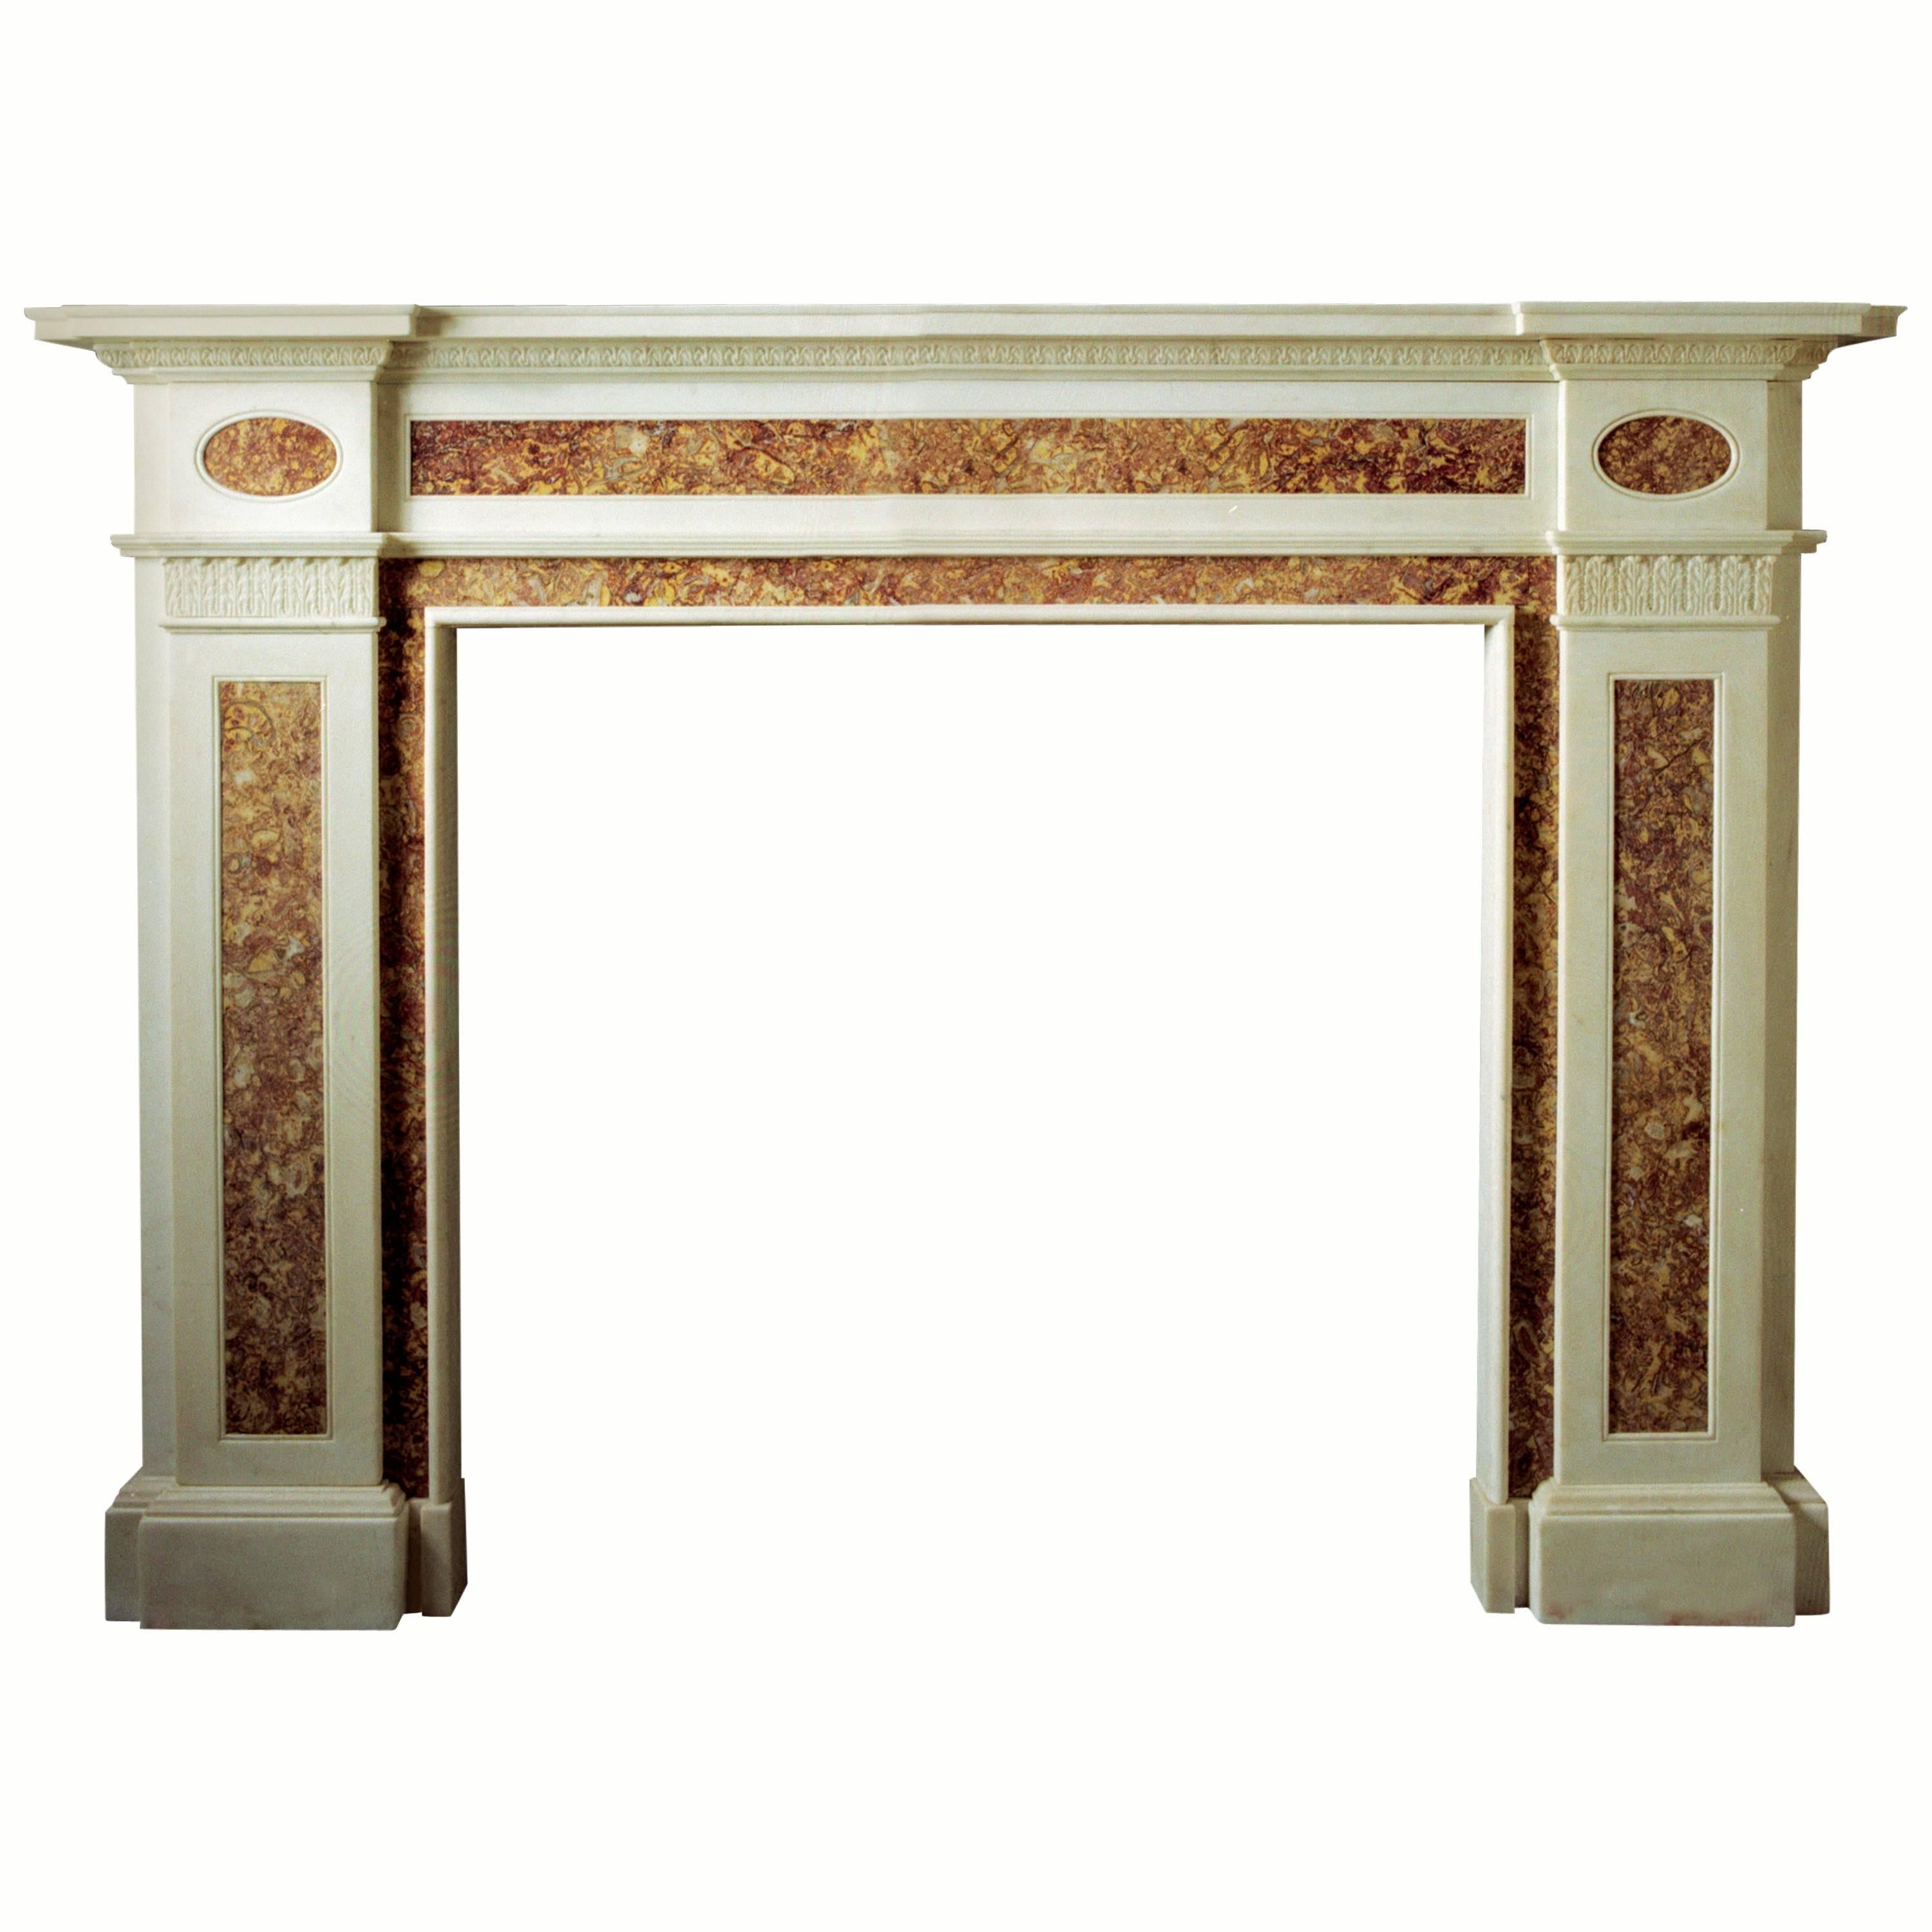 19th Century Reproduction Georgian Mantel in Statuary and Brocatella Marble